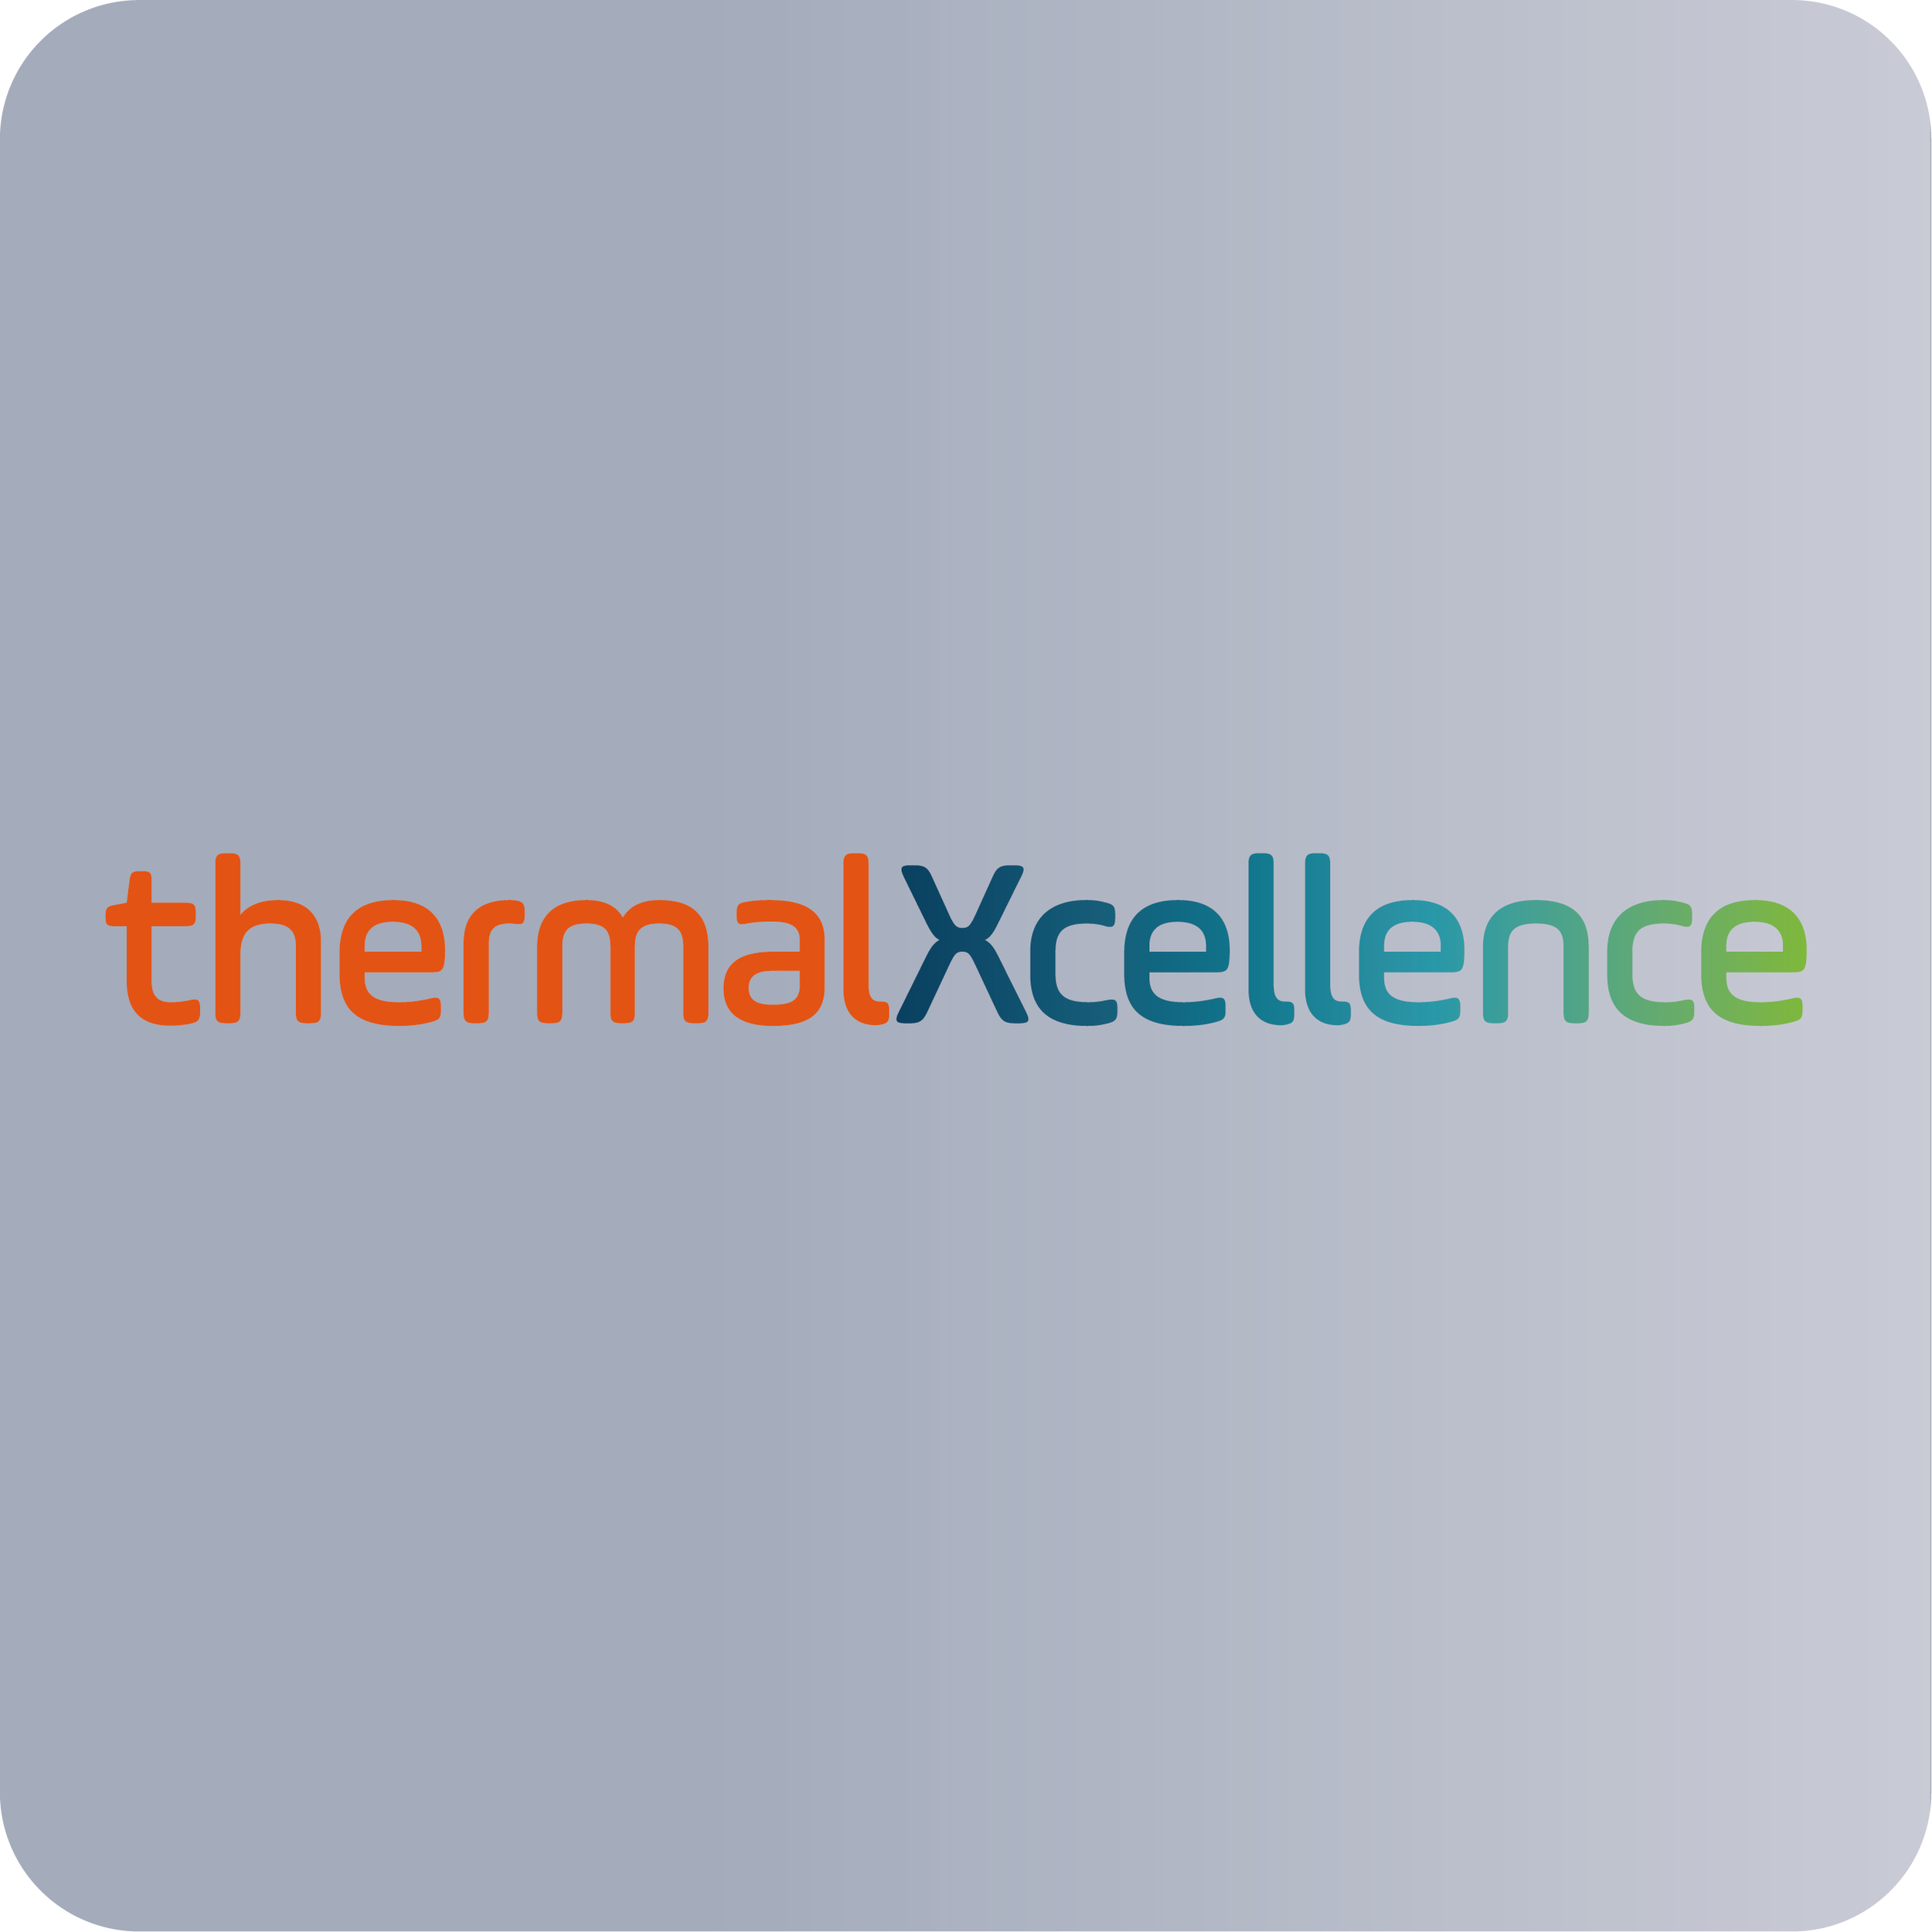 Thermal Xcellence